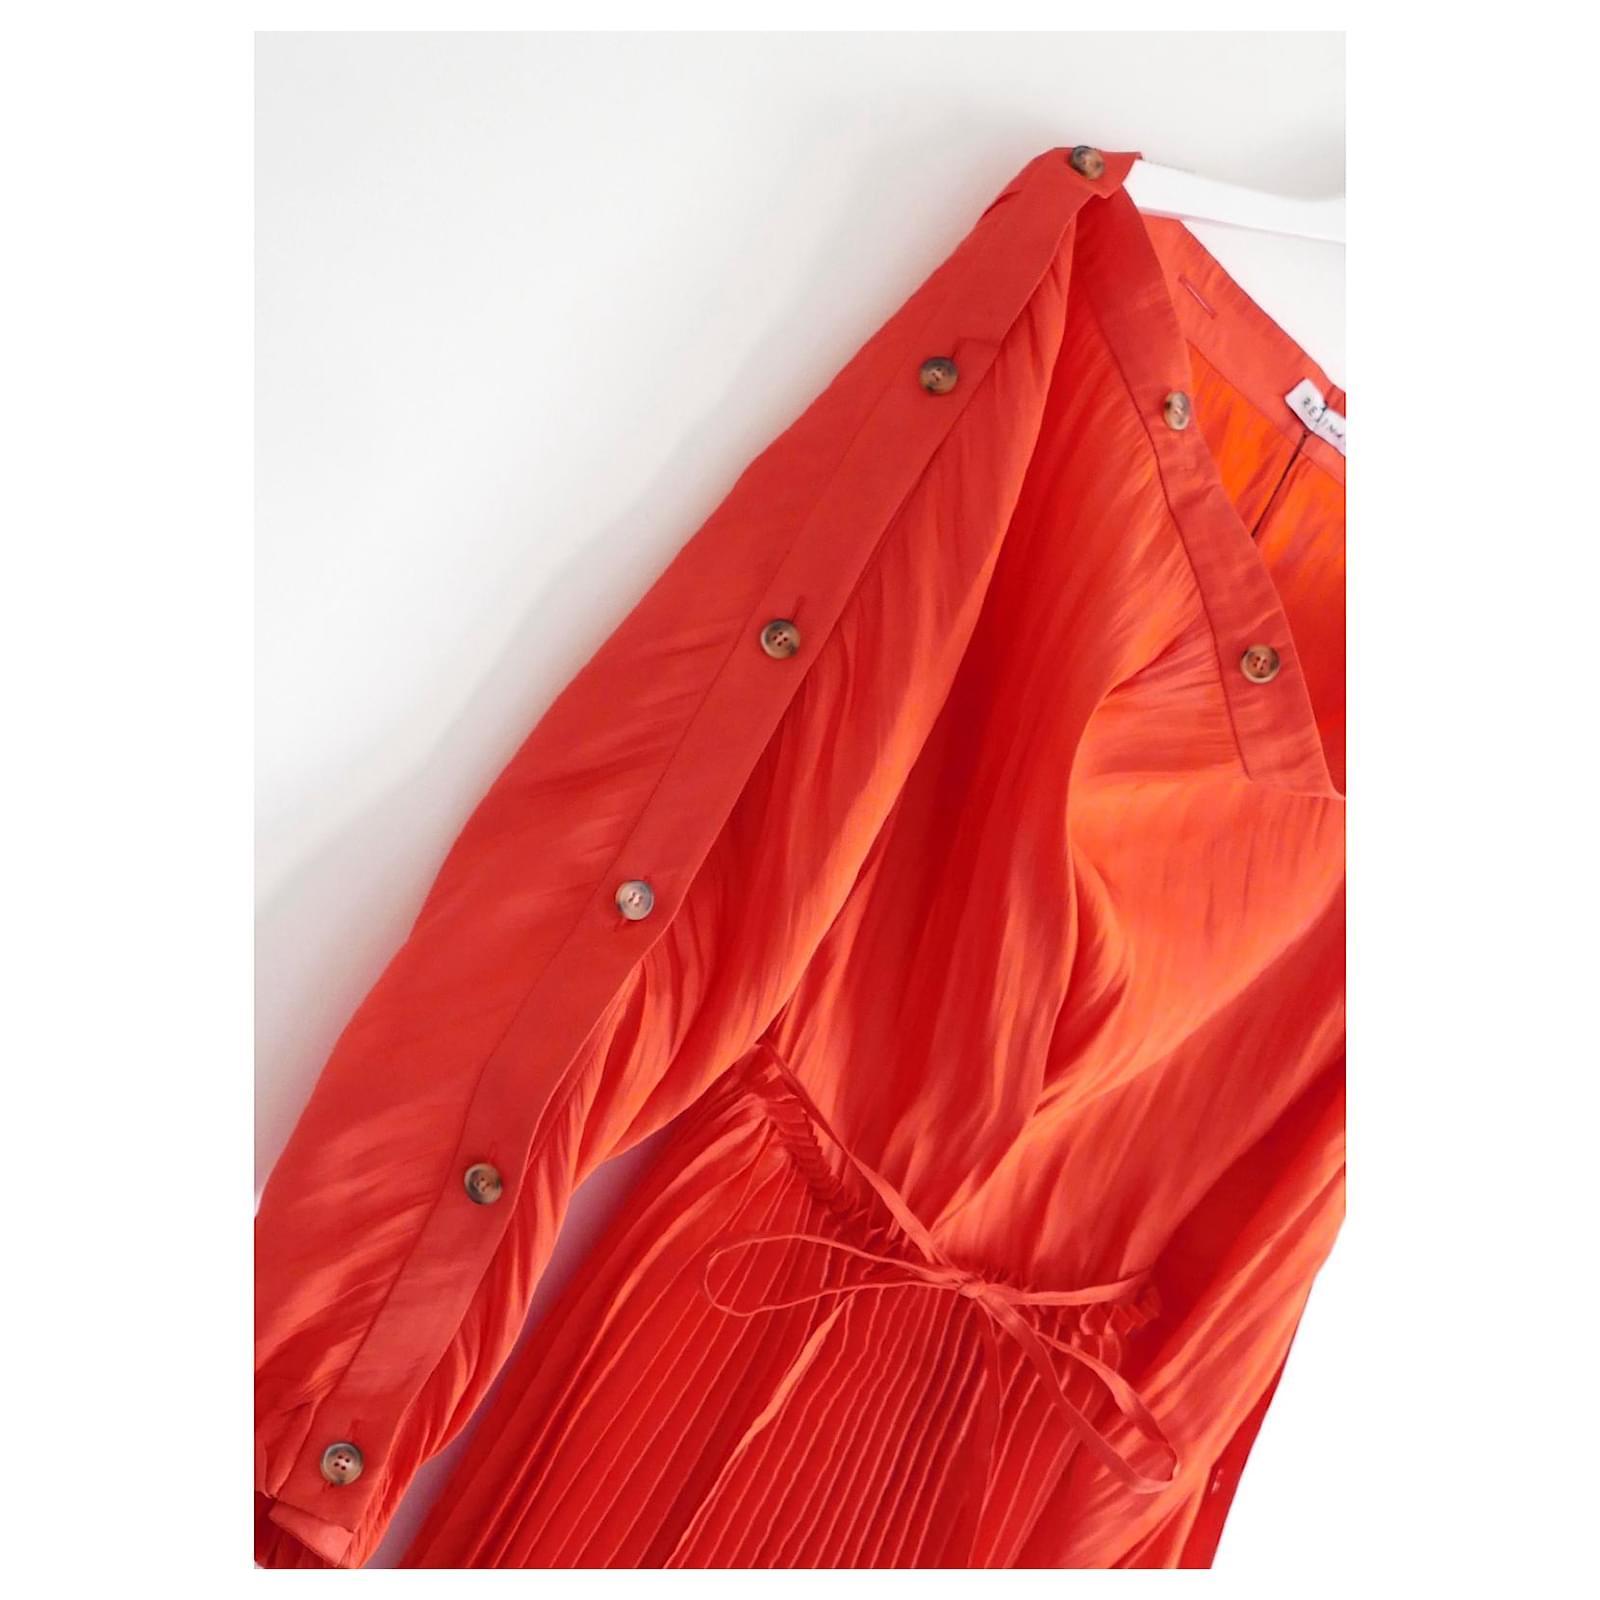 Gorgeous Rejina Pyo Elise dress. Bought for £595 and new with tag. Made from glossy, crinkle texture orangey red polyester, it has a calf length pleated skirt, optional narrow tie belt, buttoned boat neck and buttoned sleeves which can be worn open